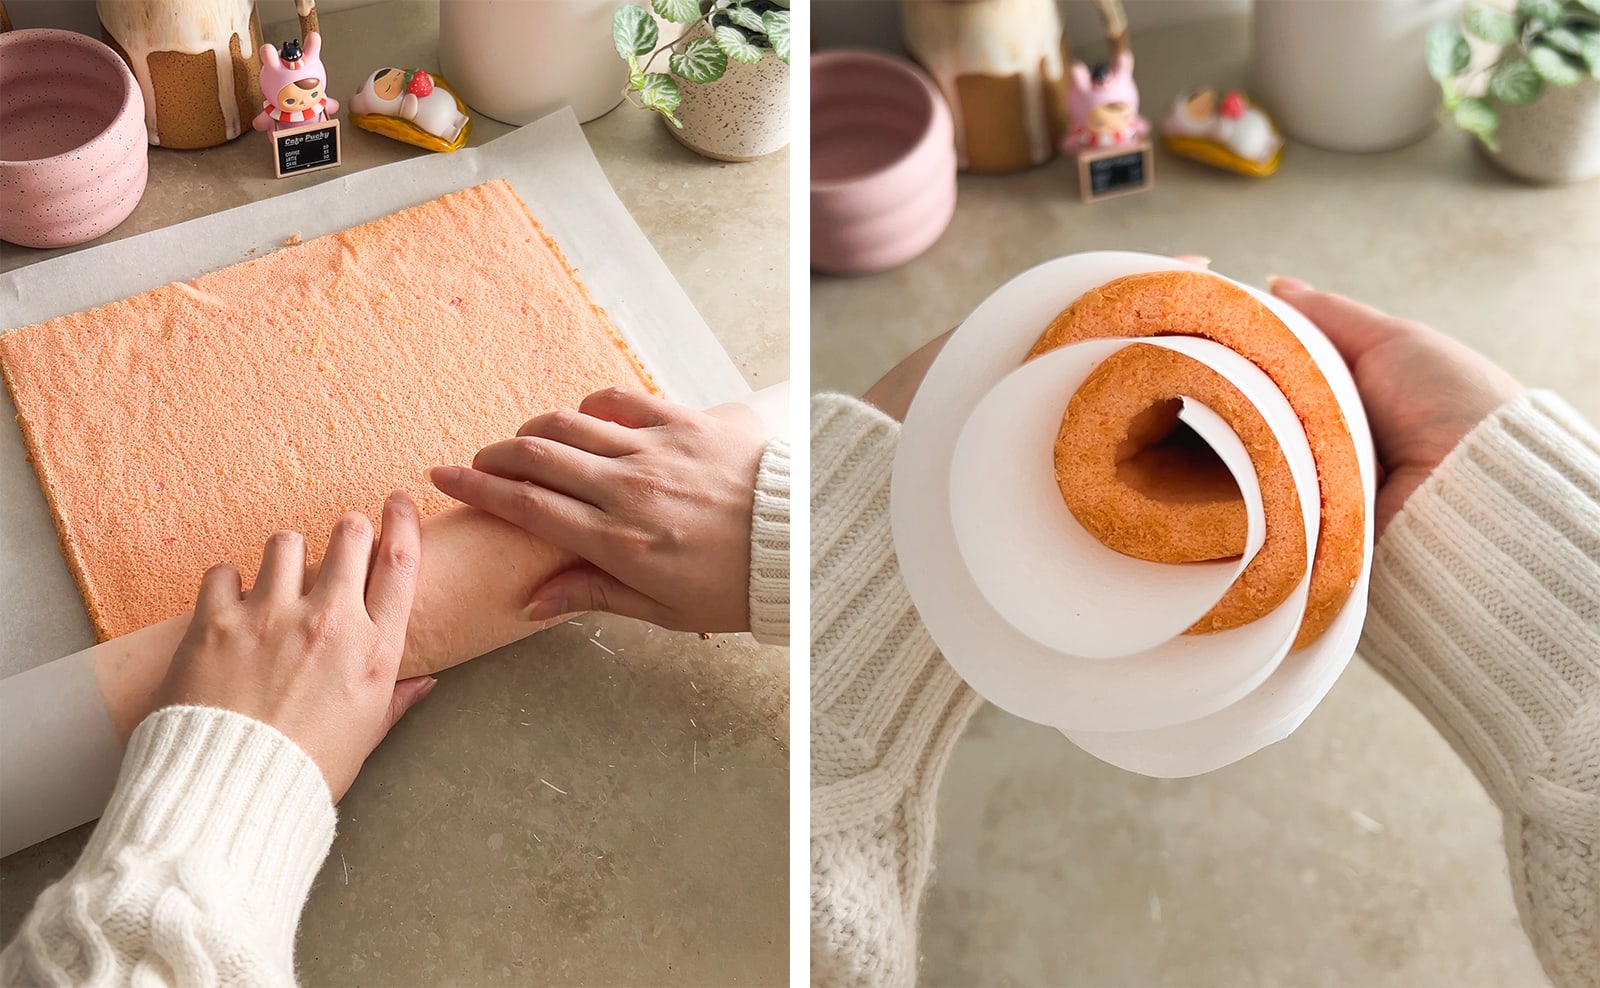 Left to right: hands rolling a cake sheet up, hands holding up rolled-up cake to show the side view.